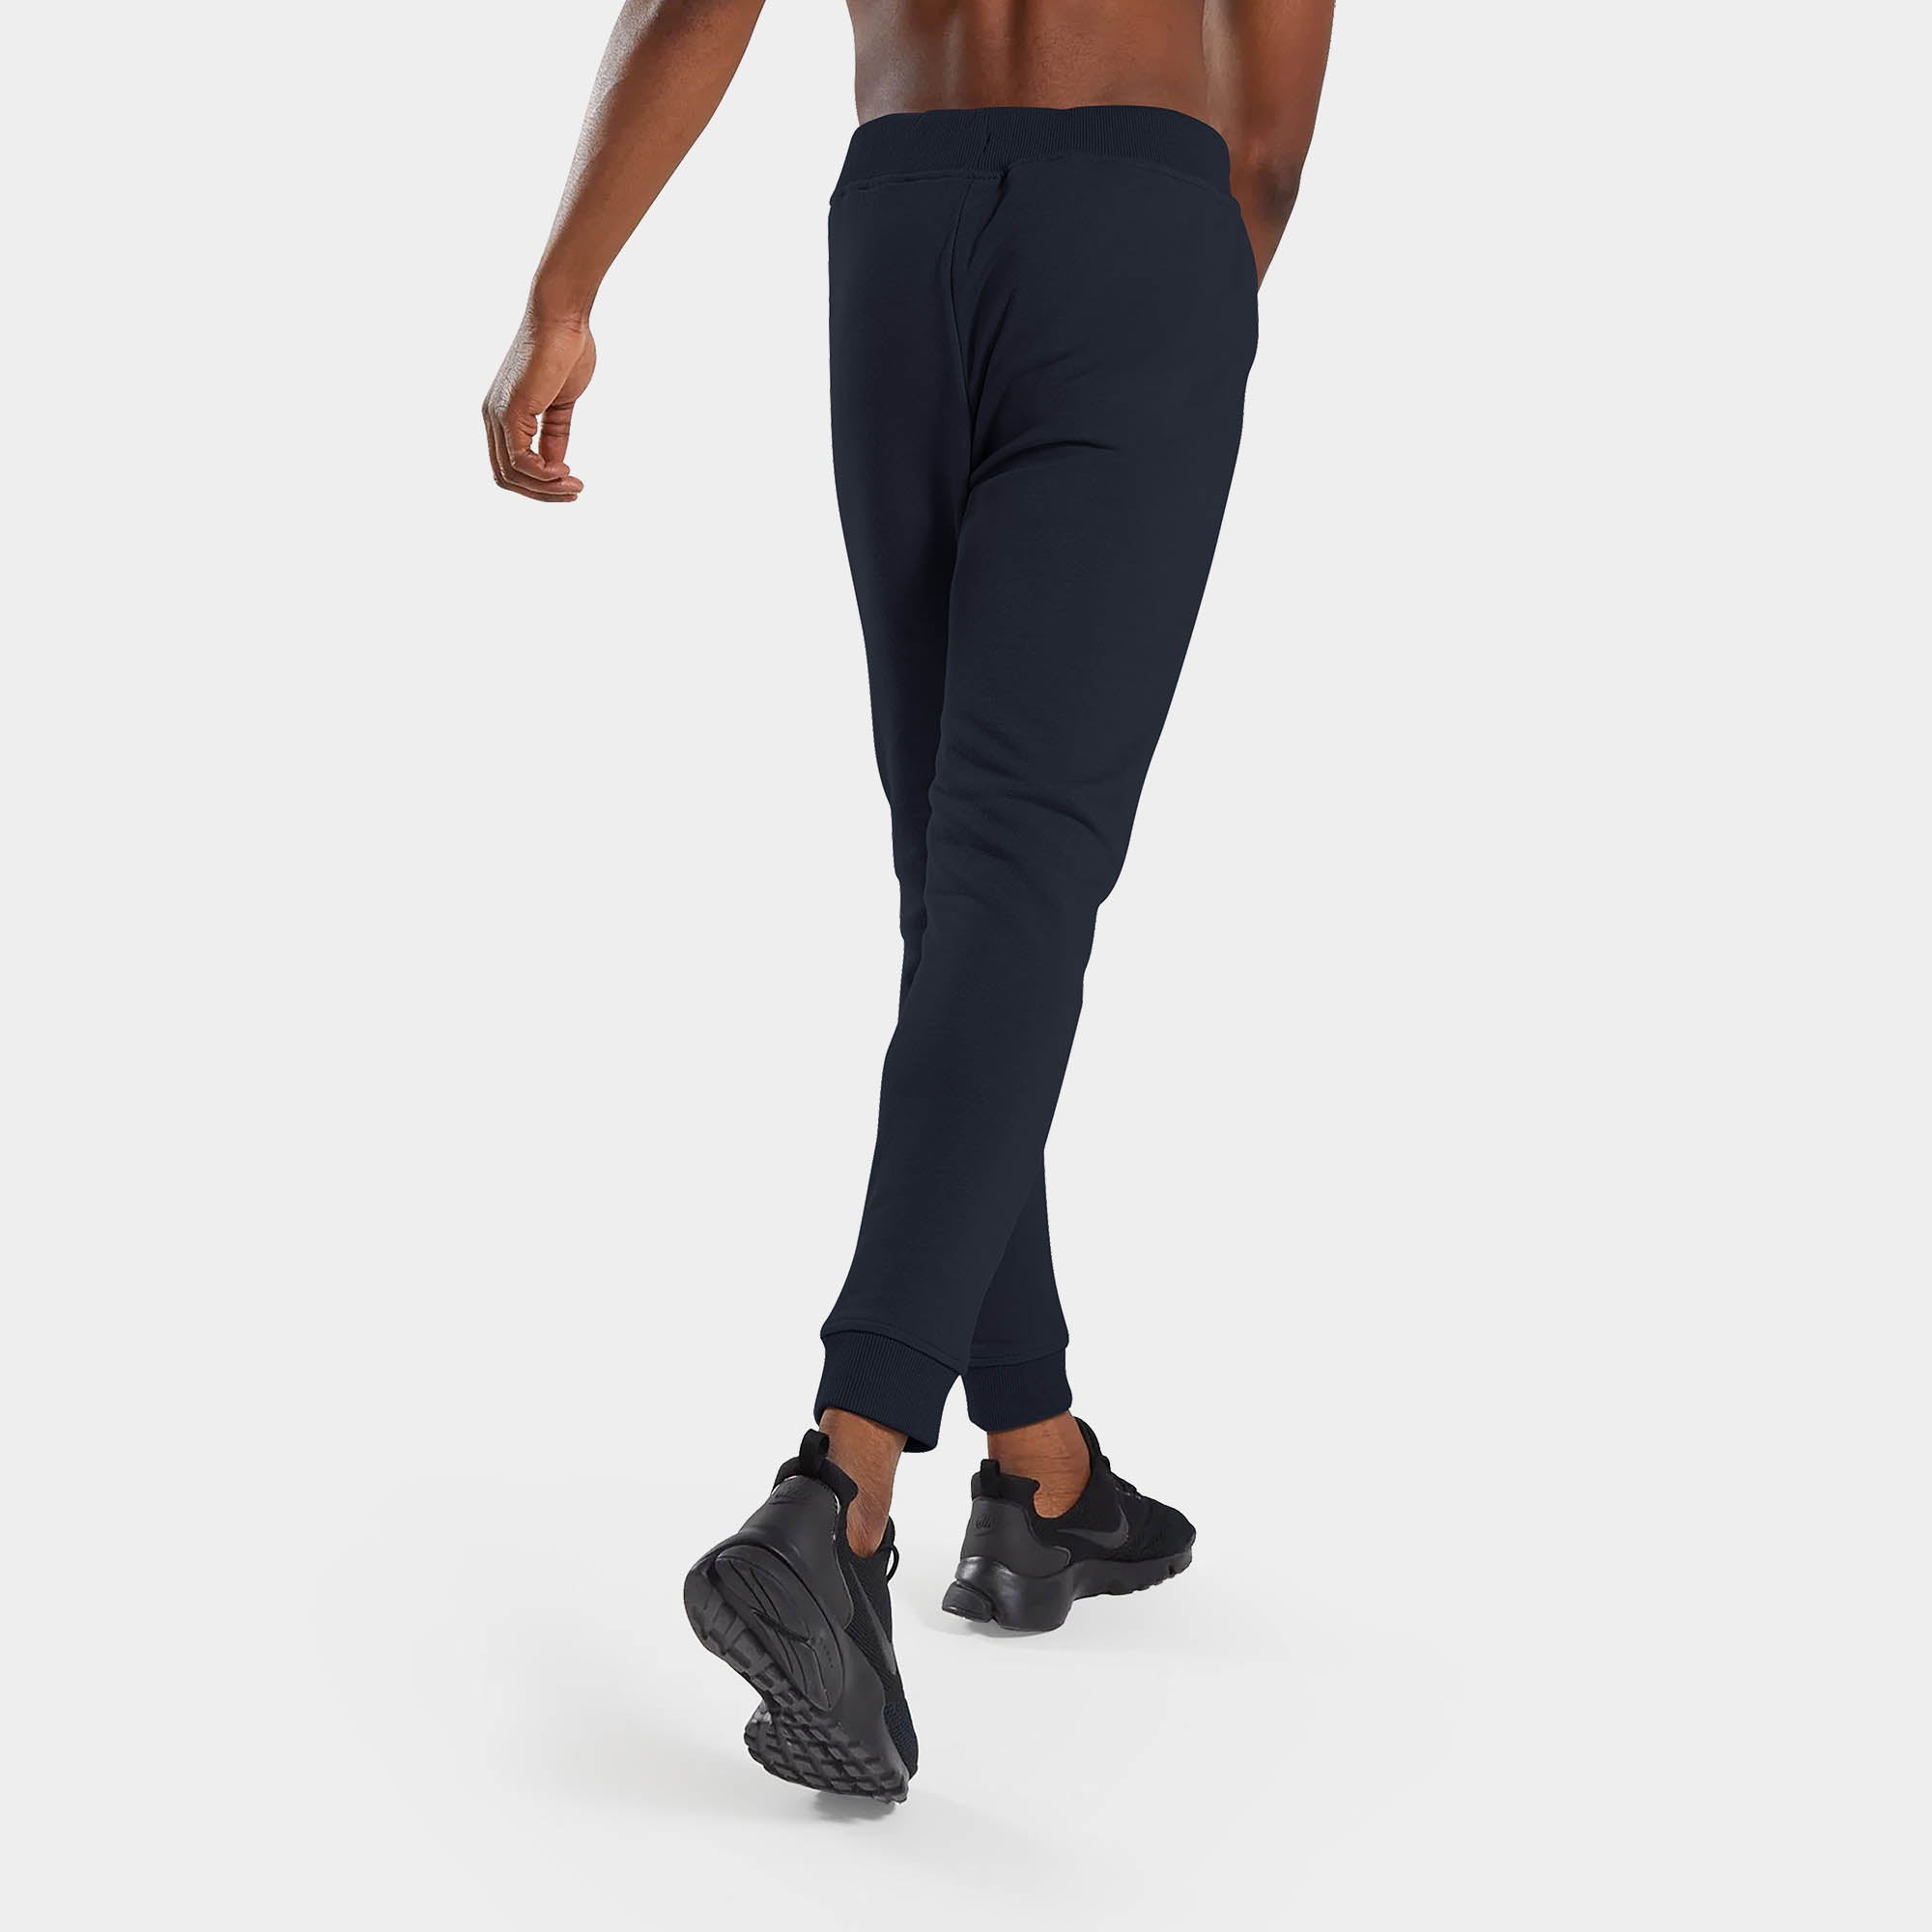 sweatpants with zipper pockets_sweatpants with zippers_men's sweatpants with zipper pockets_skinny jogger_mens skinny joggers_skinny sweatpants_boys skinny joggers_Navy